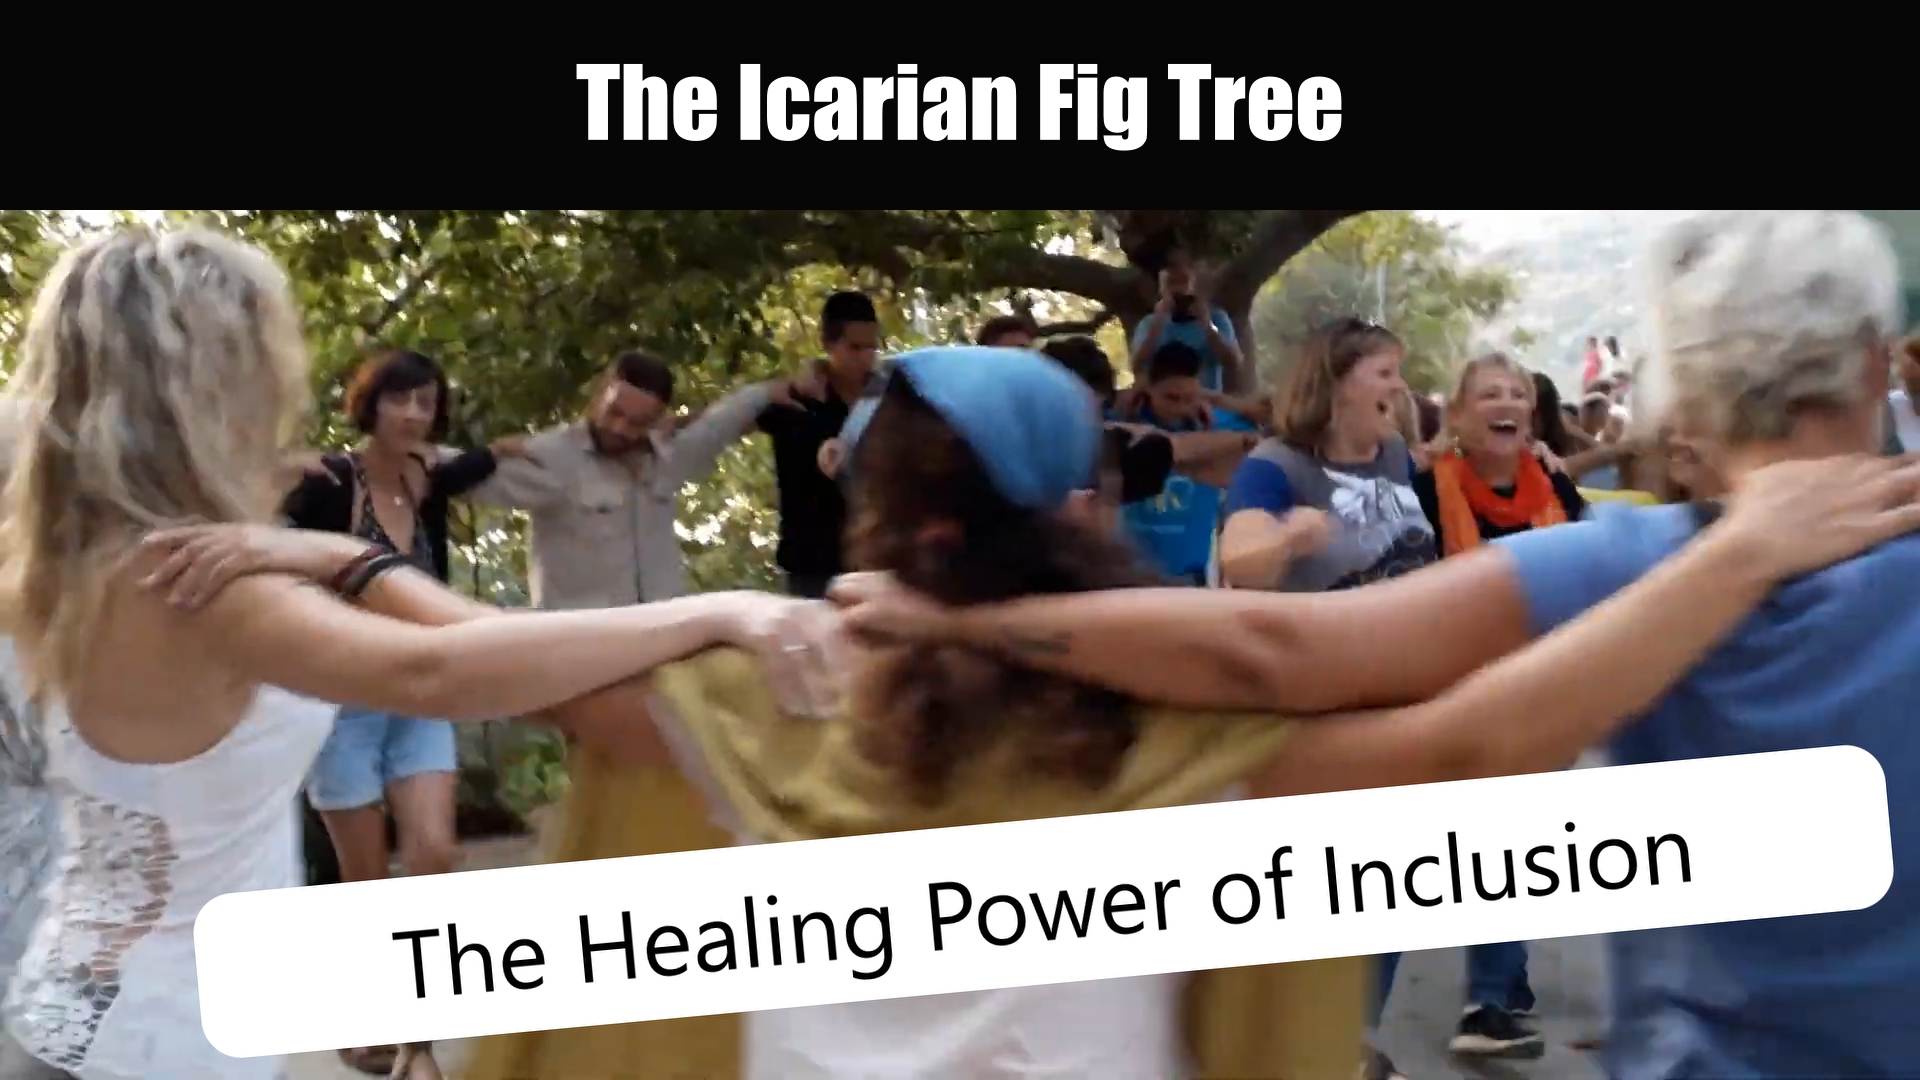 Link to the movie - The Icarian Fig Tree